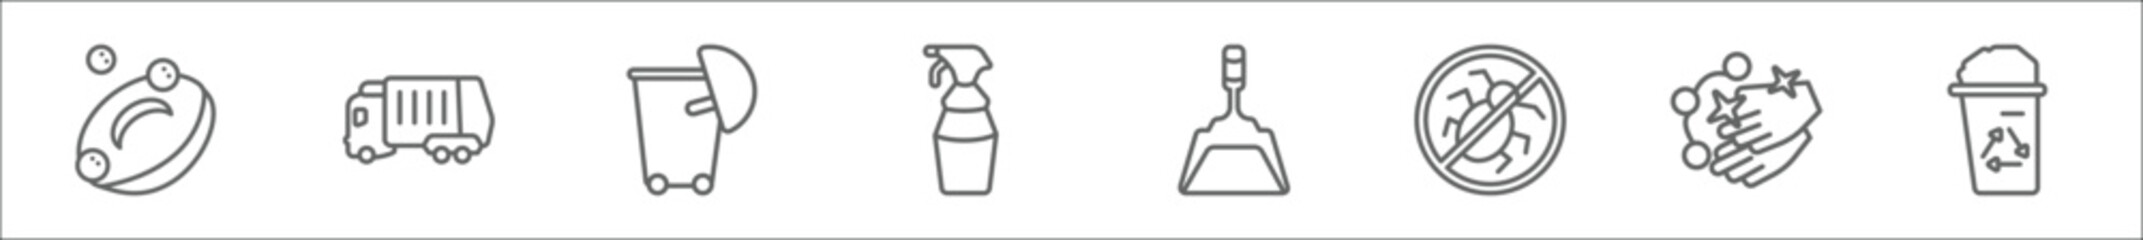 outline set of cleaning line icons. linear vector icons such as soap, garbage truck cleanin, wiping trash container, glass cleaner, dustpan, virus cleanin, hand wash, wiping trash